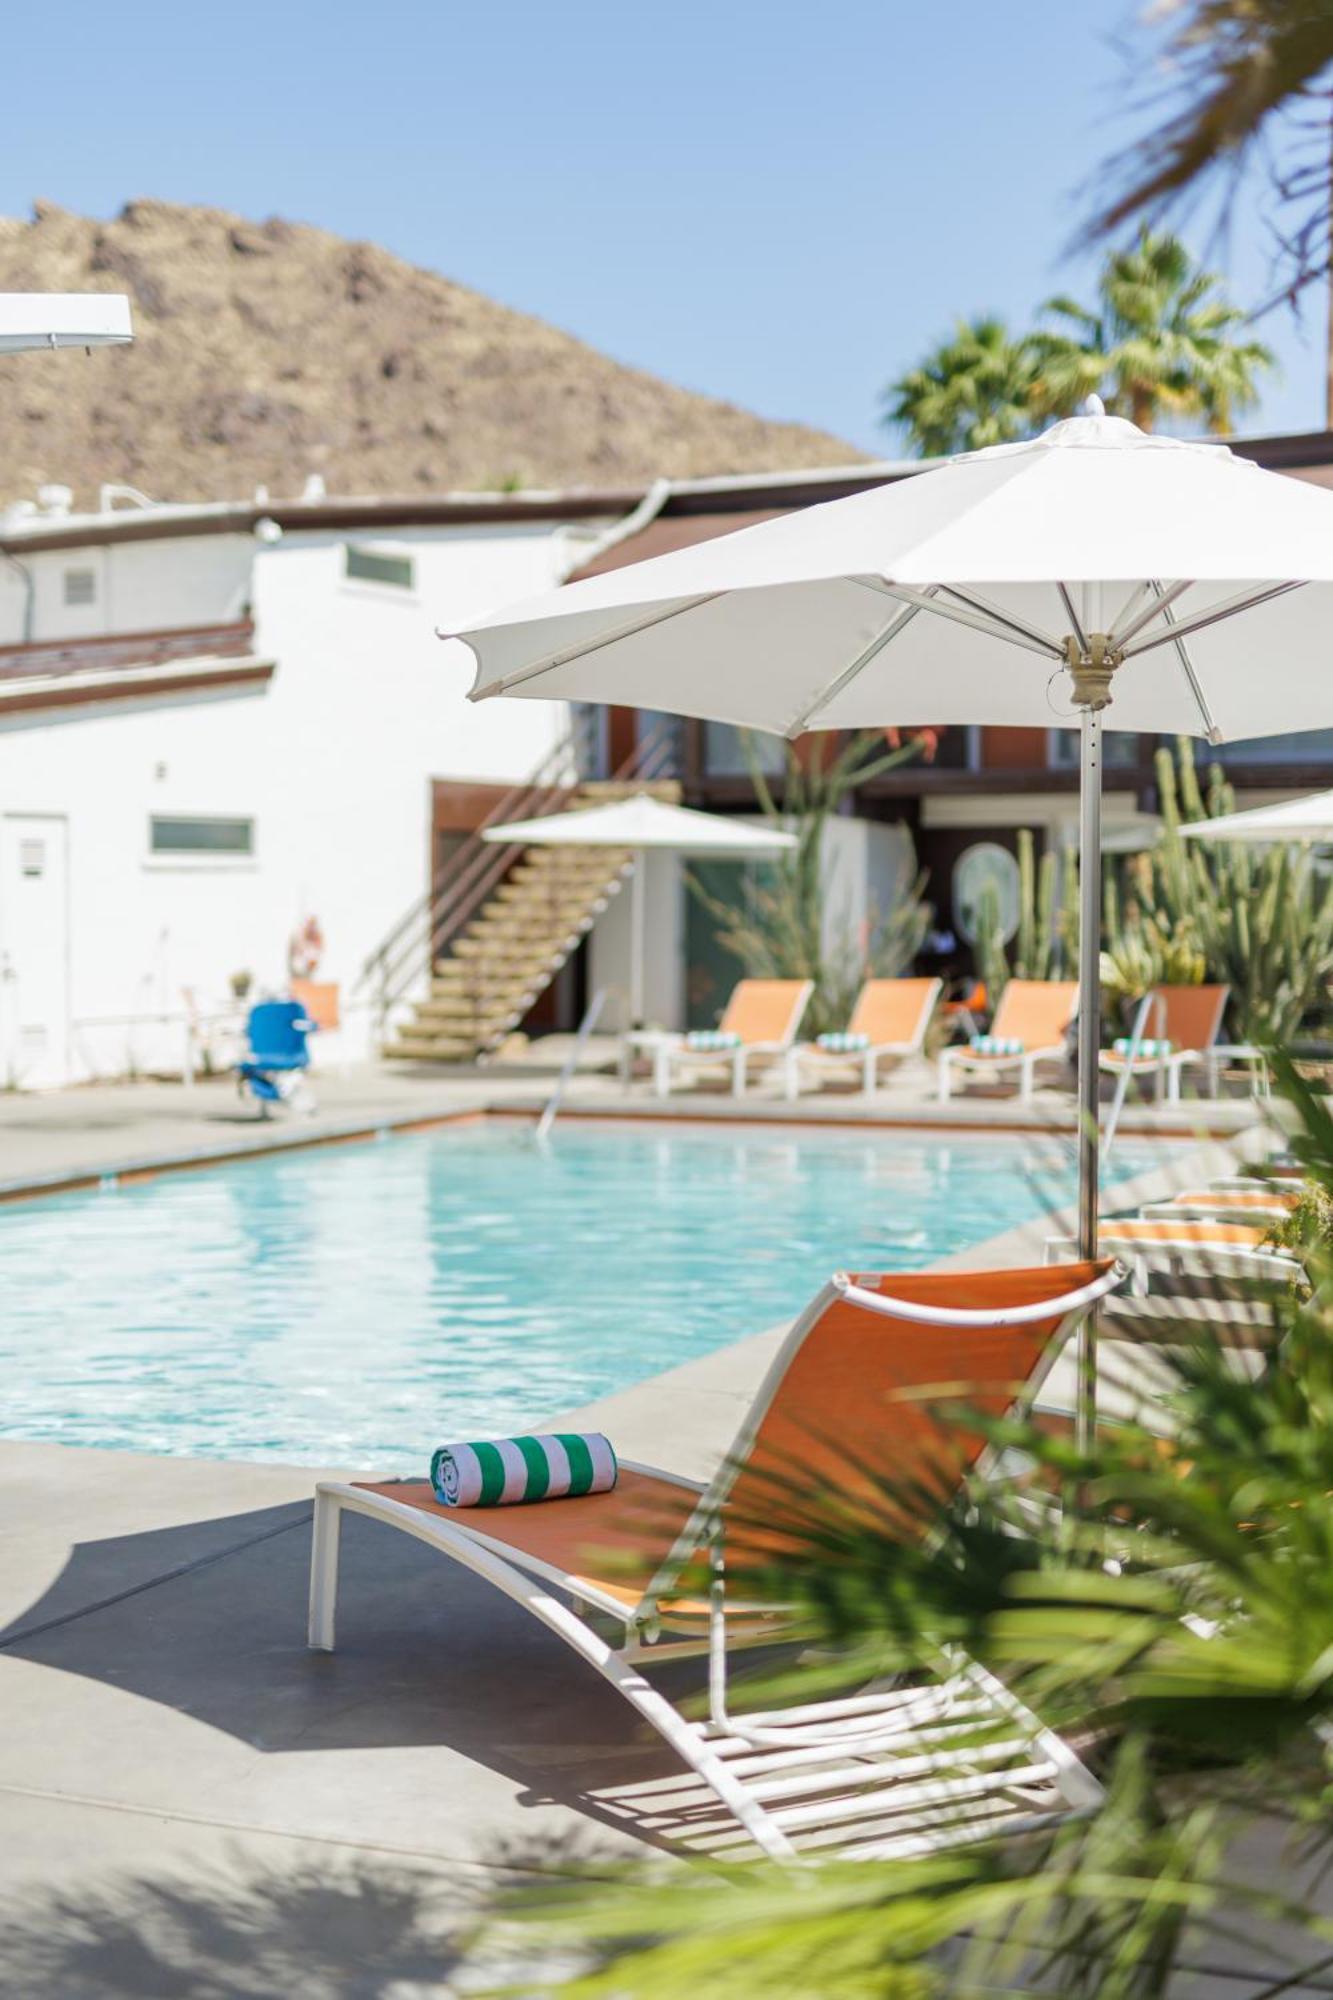 Del Marcos Hotel, A Kirkwood Collection Hotel (Adults Only) Palm Springs Ngoại thất bức ảnh